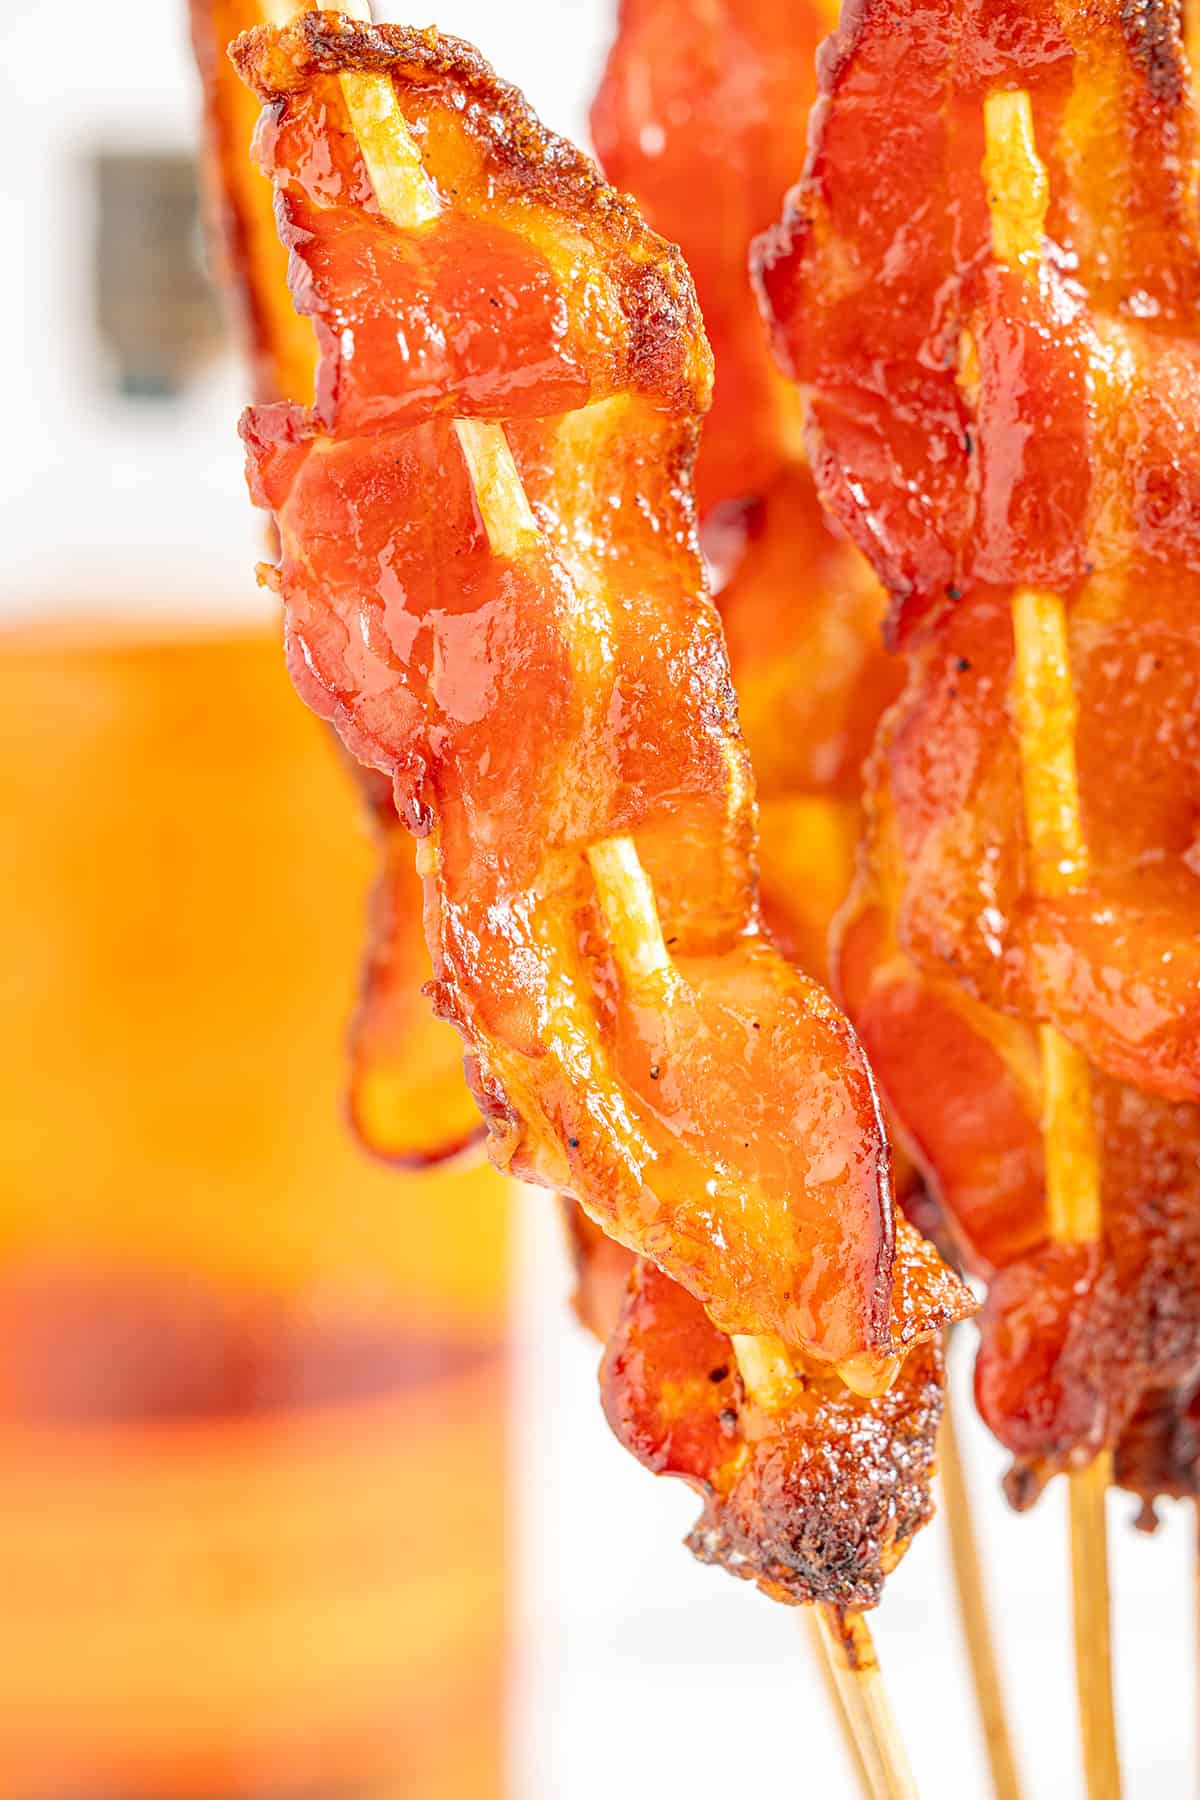 Candied bacon on a stick standing upright on a counter with a bottle of bourbon in the background.